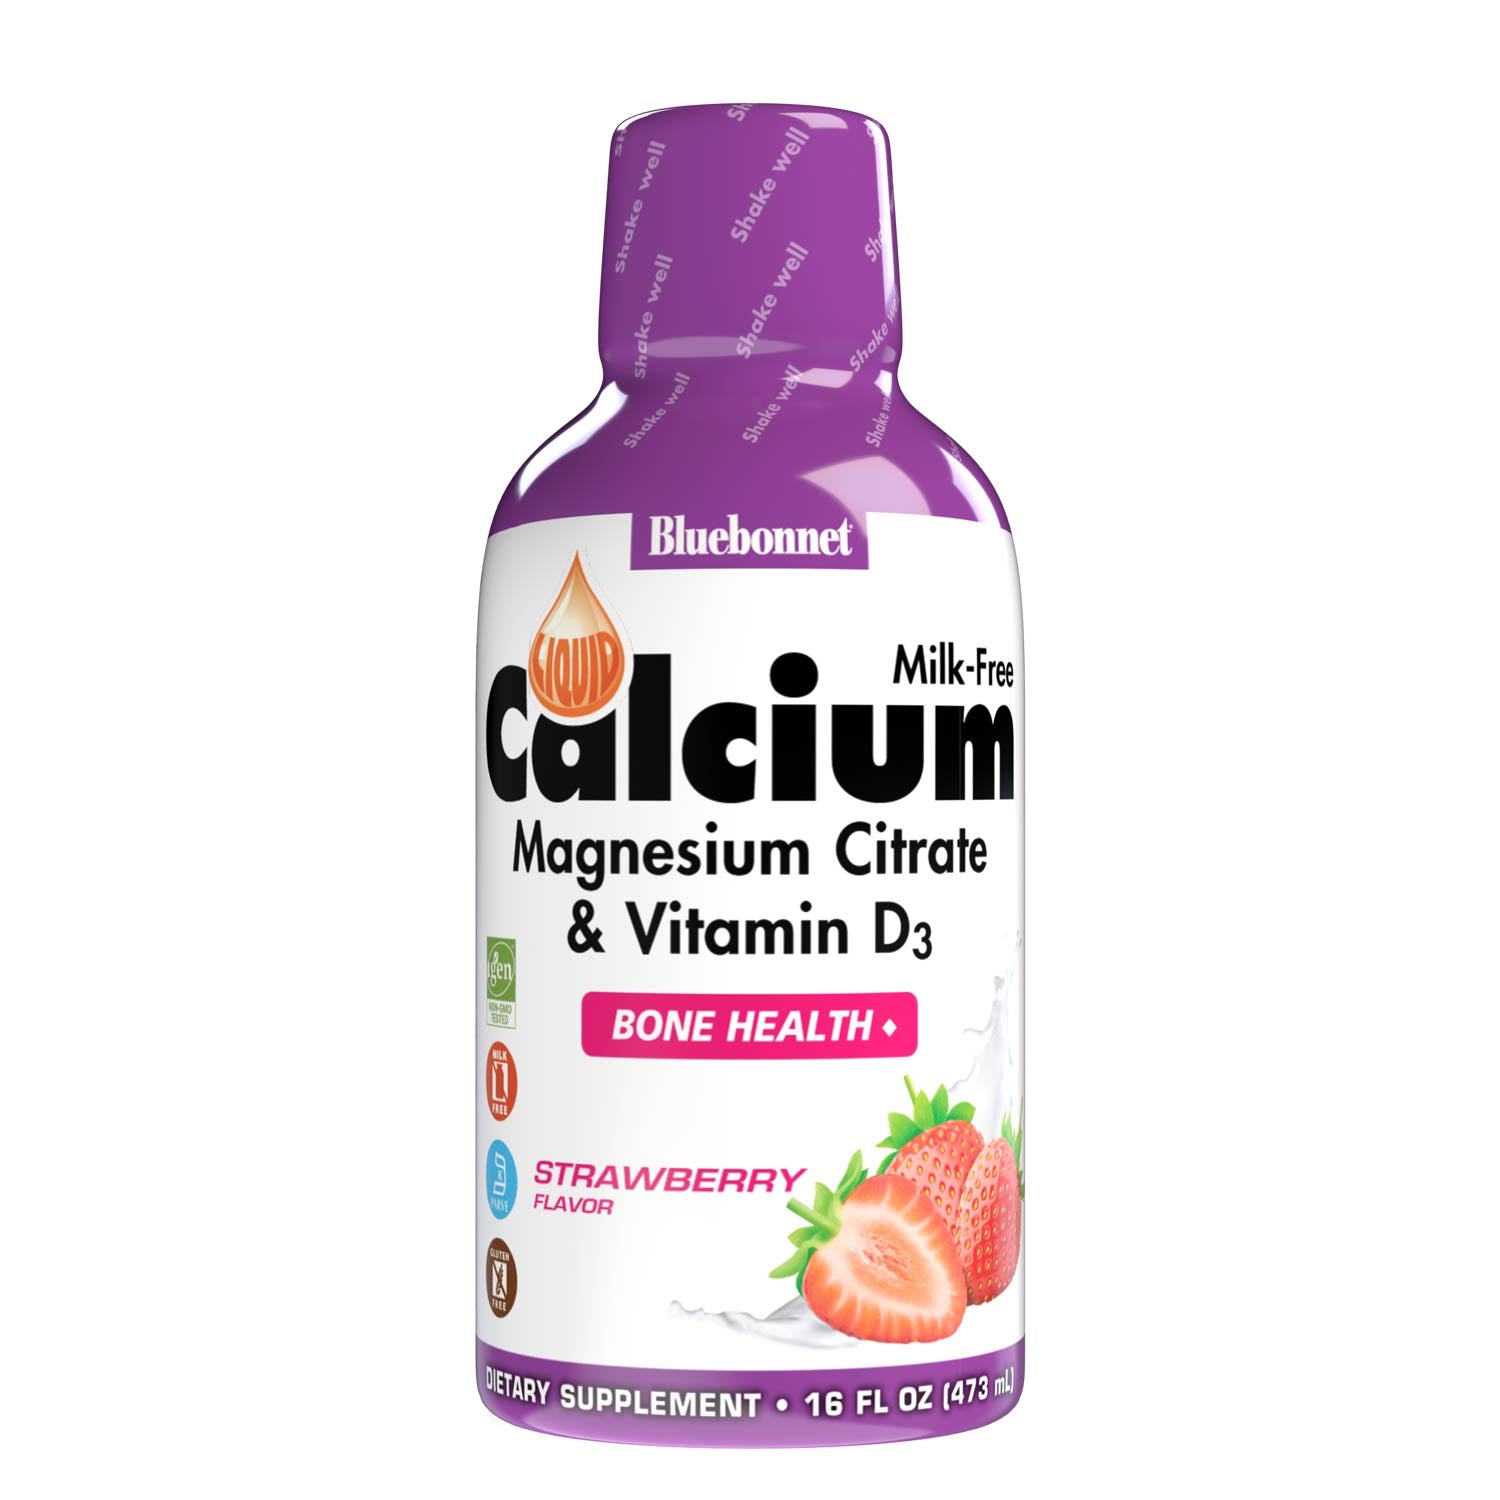 Bluebonnet's Liquid Calcium Magnesium Citrate with Vitamin D3 are formulated with calcium in a chelate of calcium citrate, as well as magnesium in a chelate of magnesium citrate and magnesium aspartate in a delicious strawberry flavor. Plus, this formula are formulated with vitamin D3 (cholecalciferol) from lanolin for strong healthy bones. #flavor_strawberry